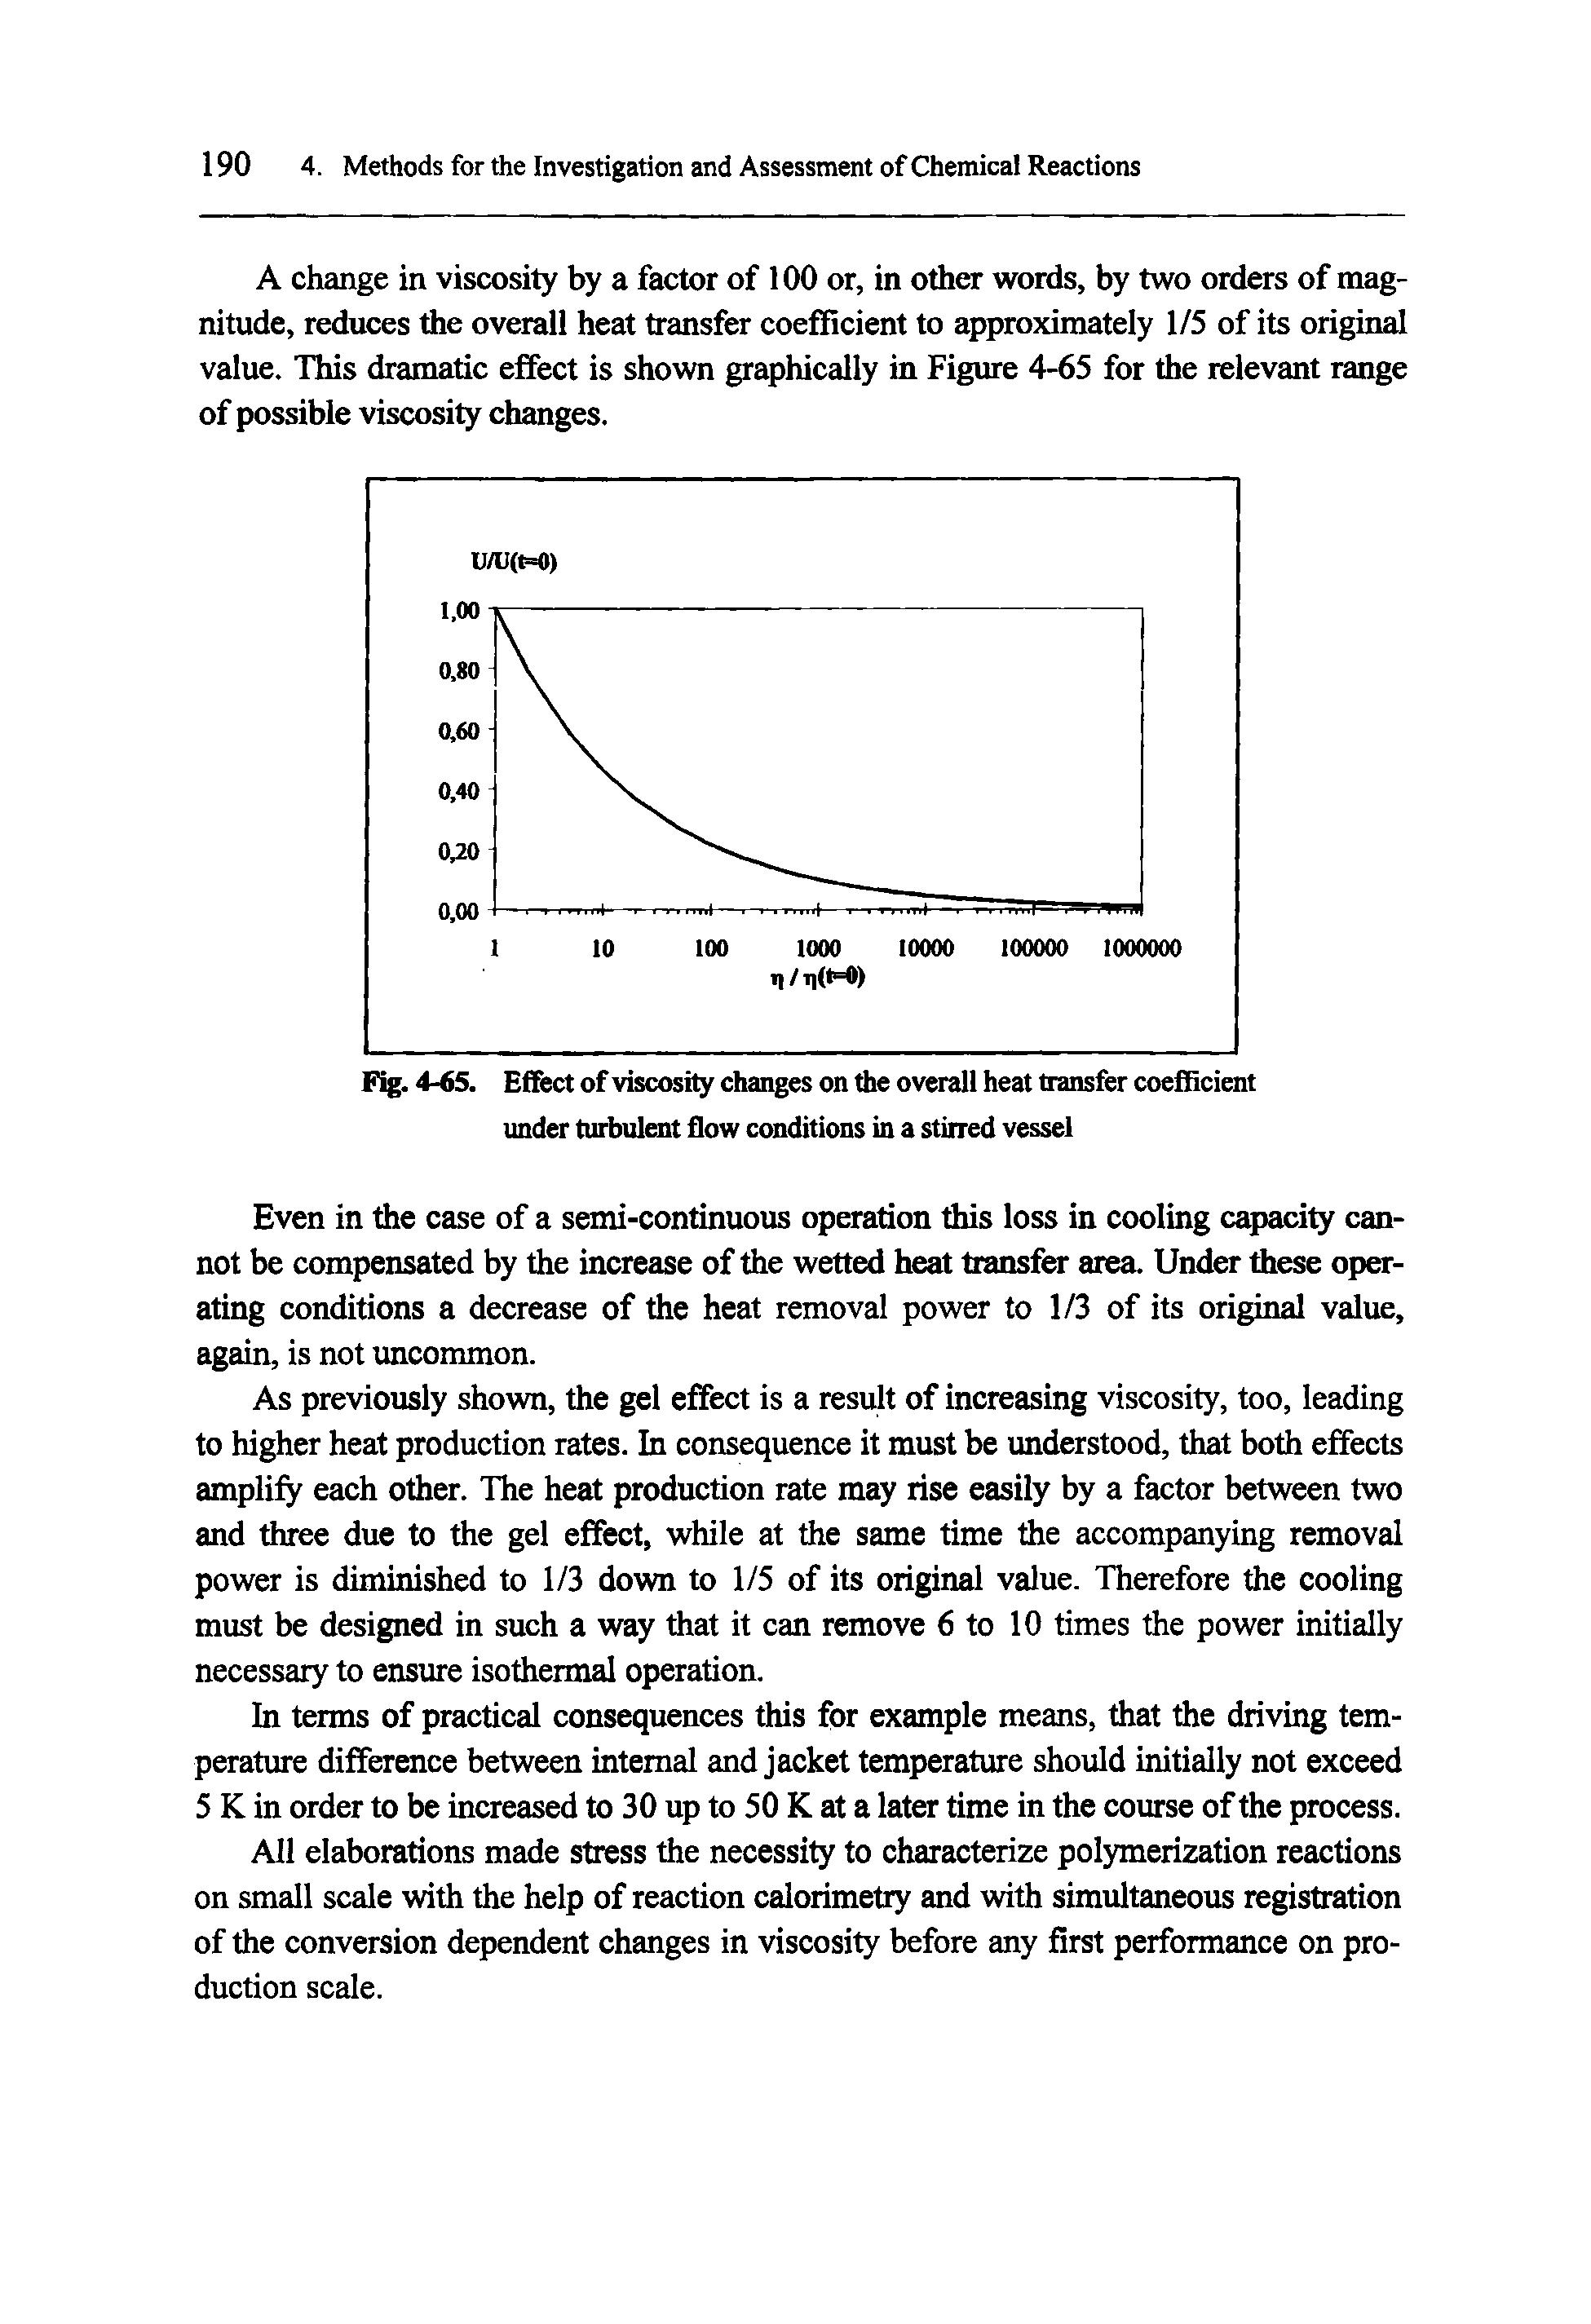 Fig. 4-65. Effect of viscosity changes on die overall heat transfer coefficient under turbulent flow conditions in a stirred vessel...